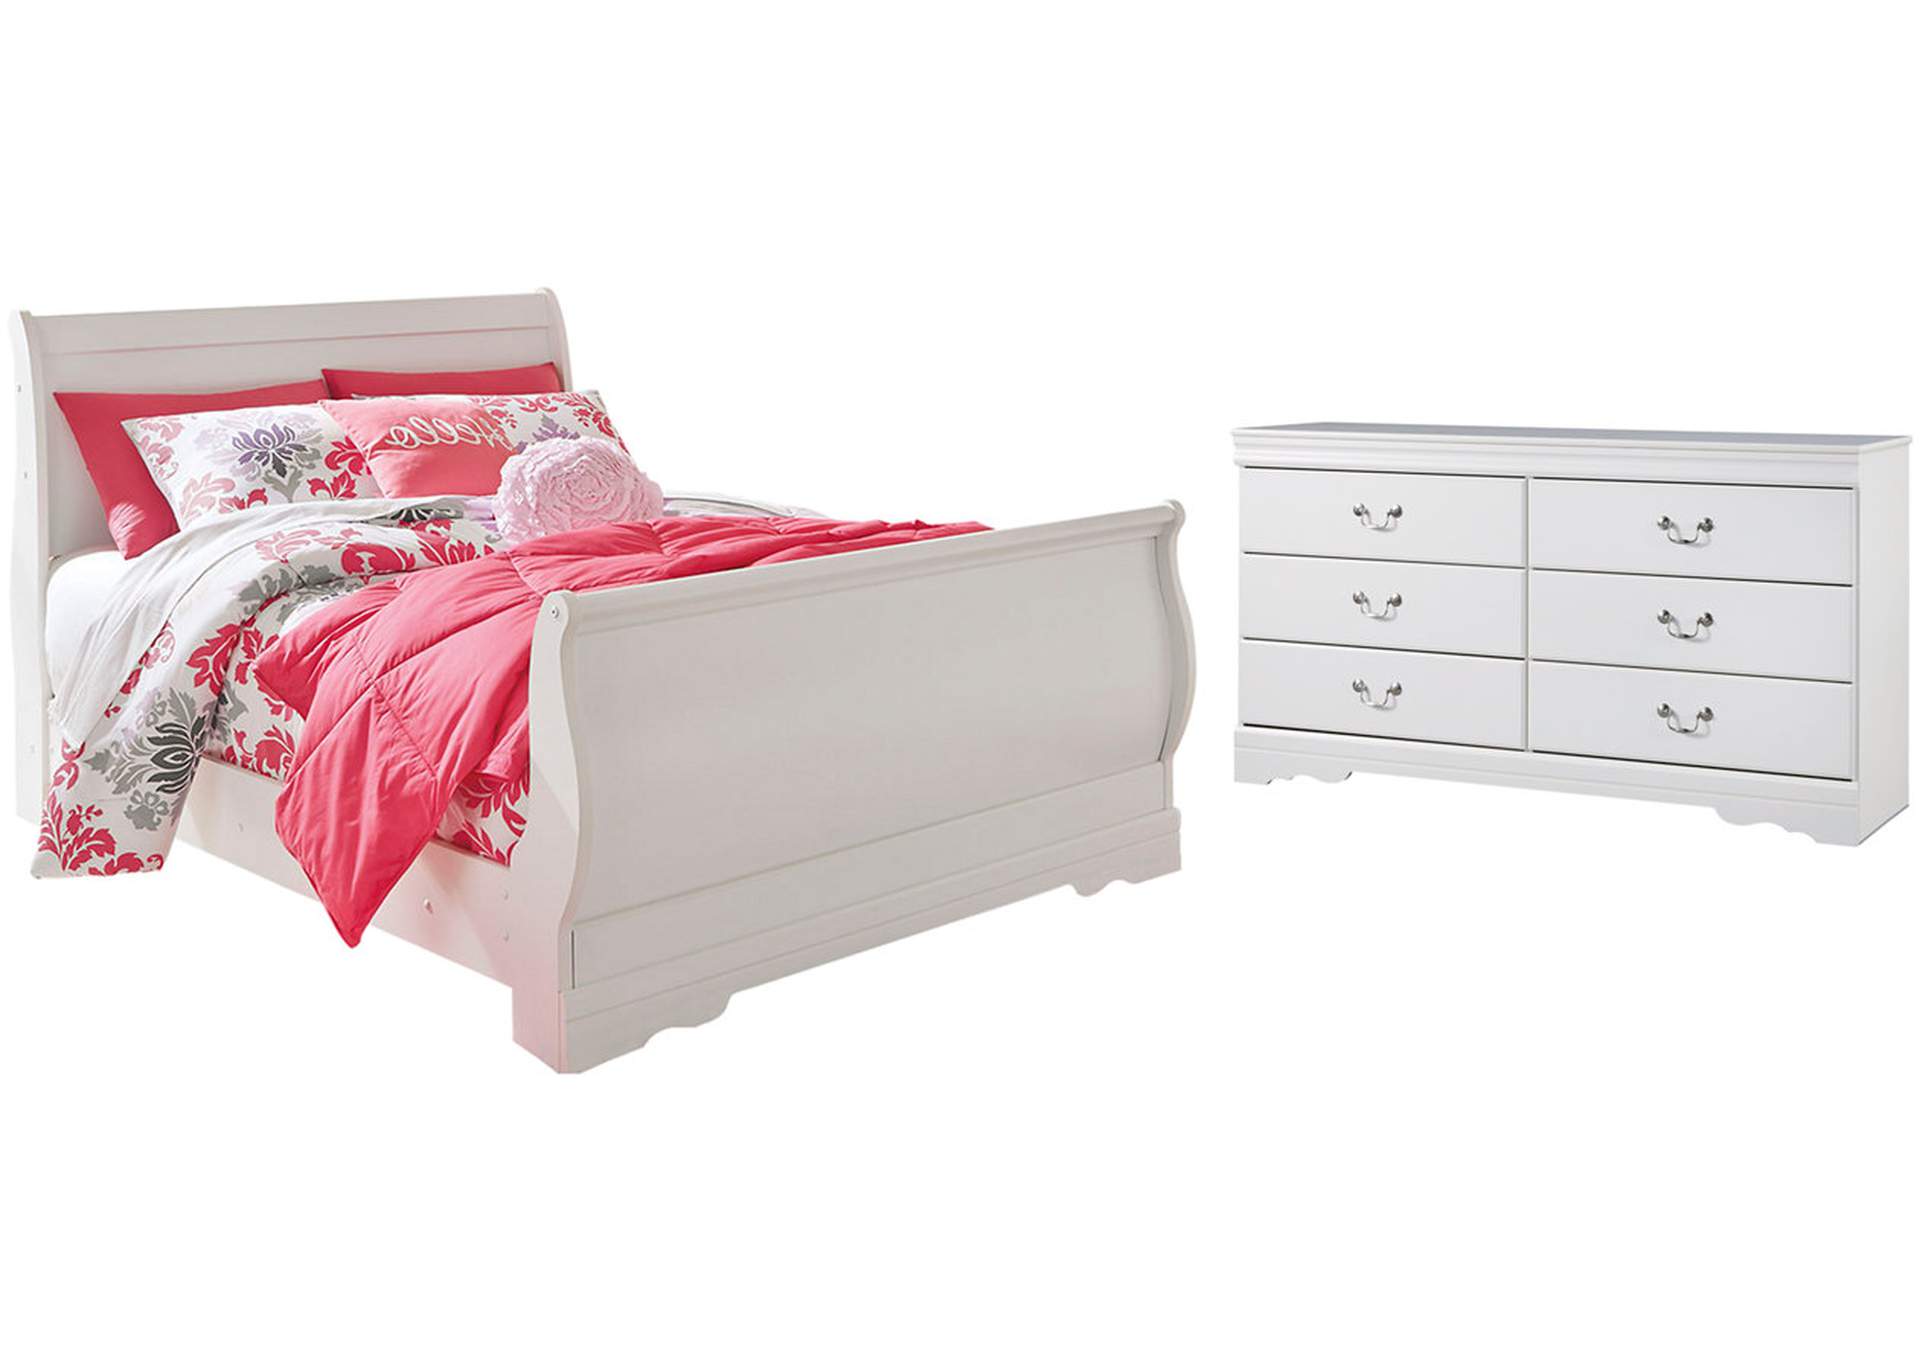 Anarasia Full Sleigh Bed with Dresser,Signature Design By Ashley